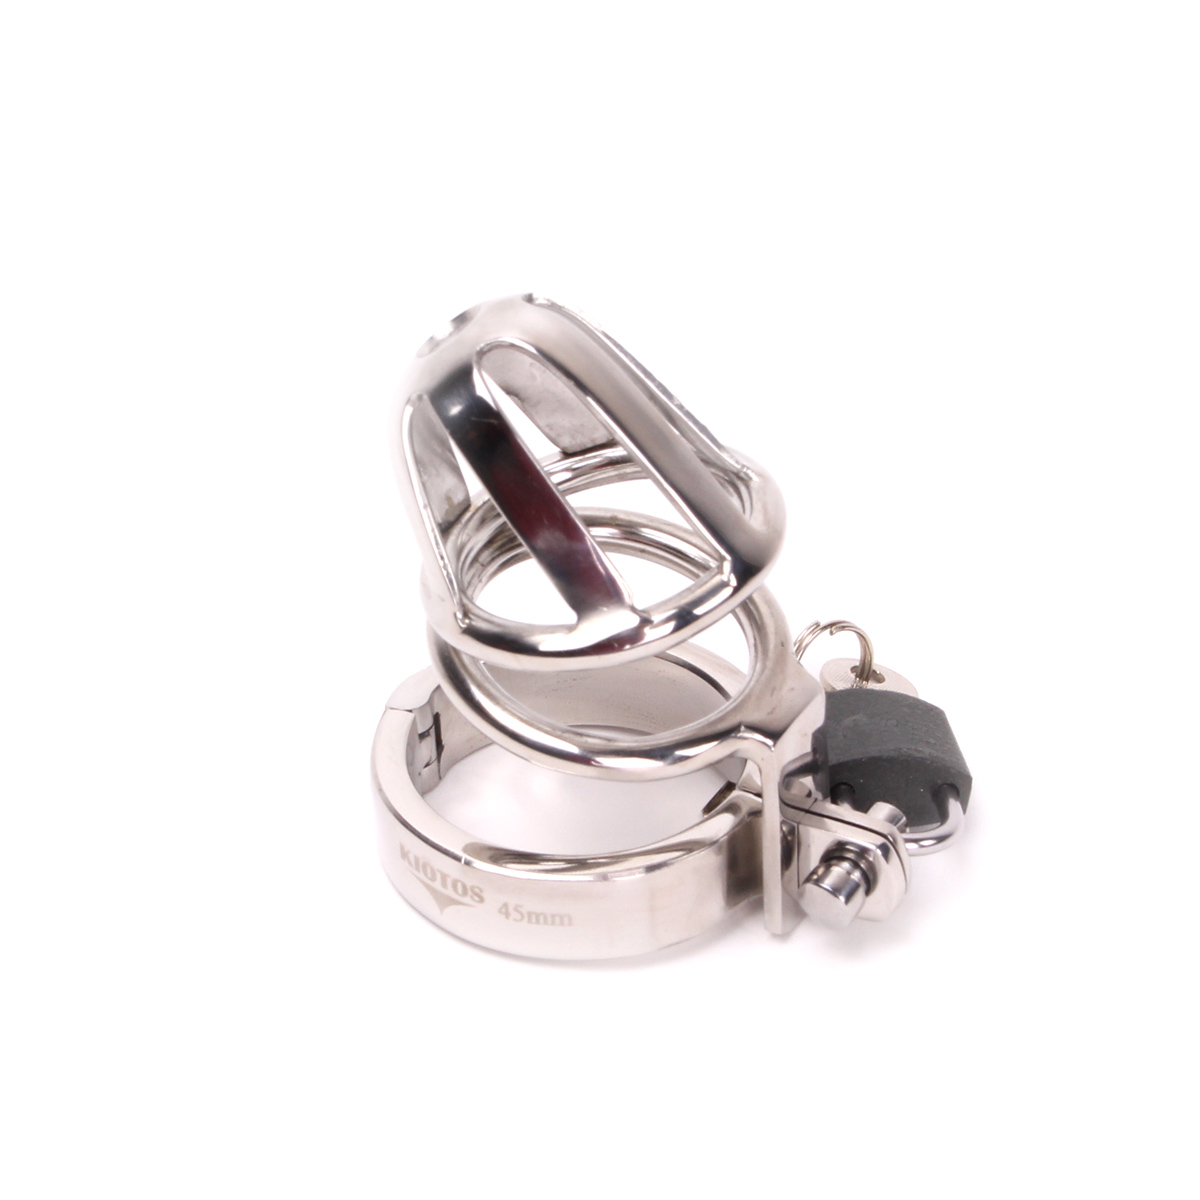 Chastity-Cage-Small-Steel-OPR-277030-1